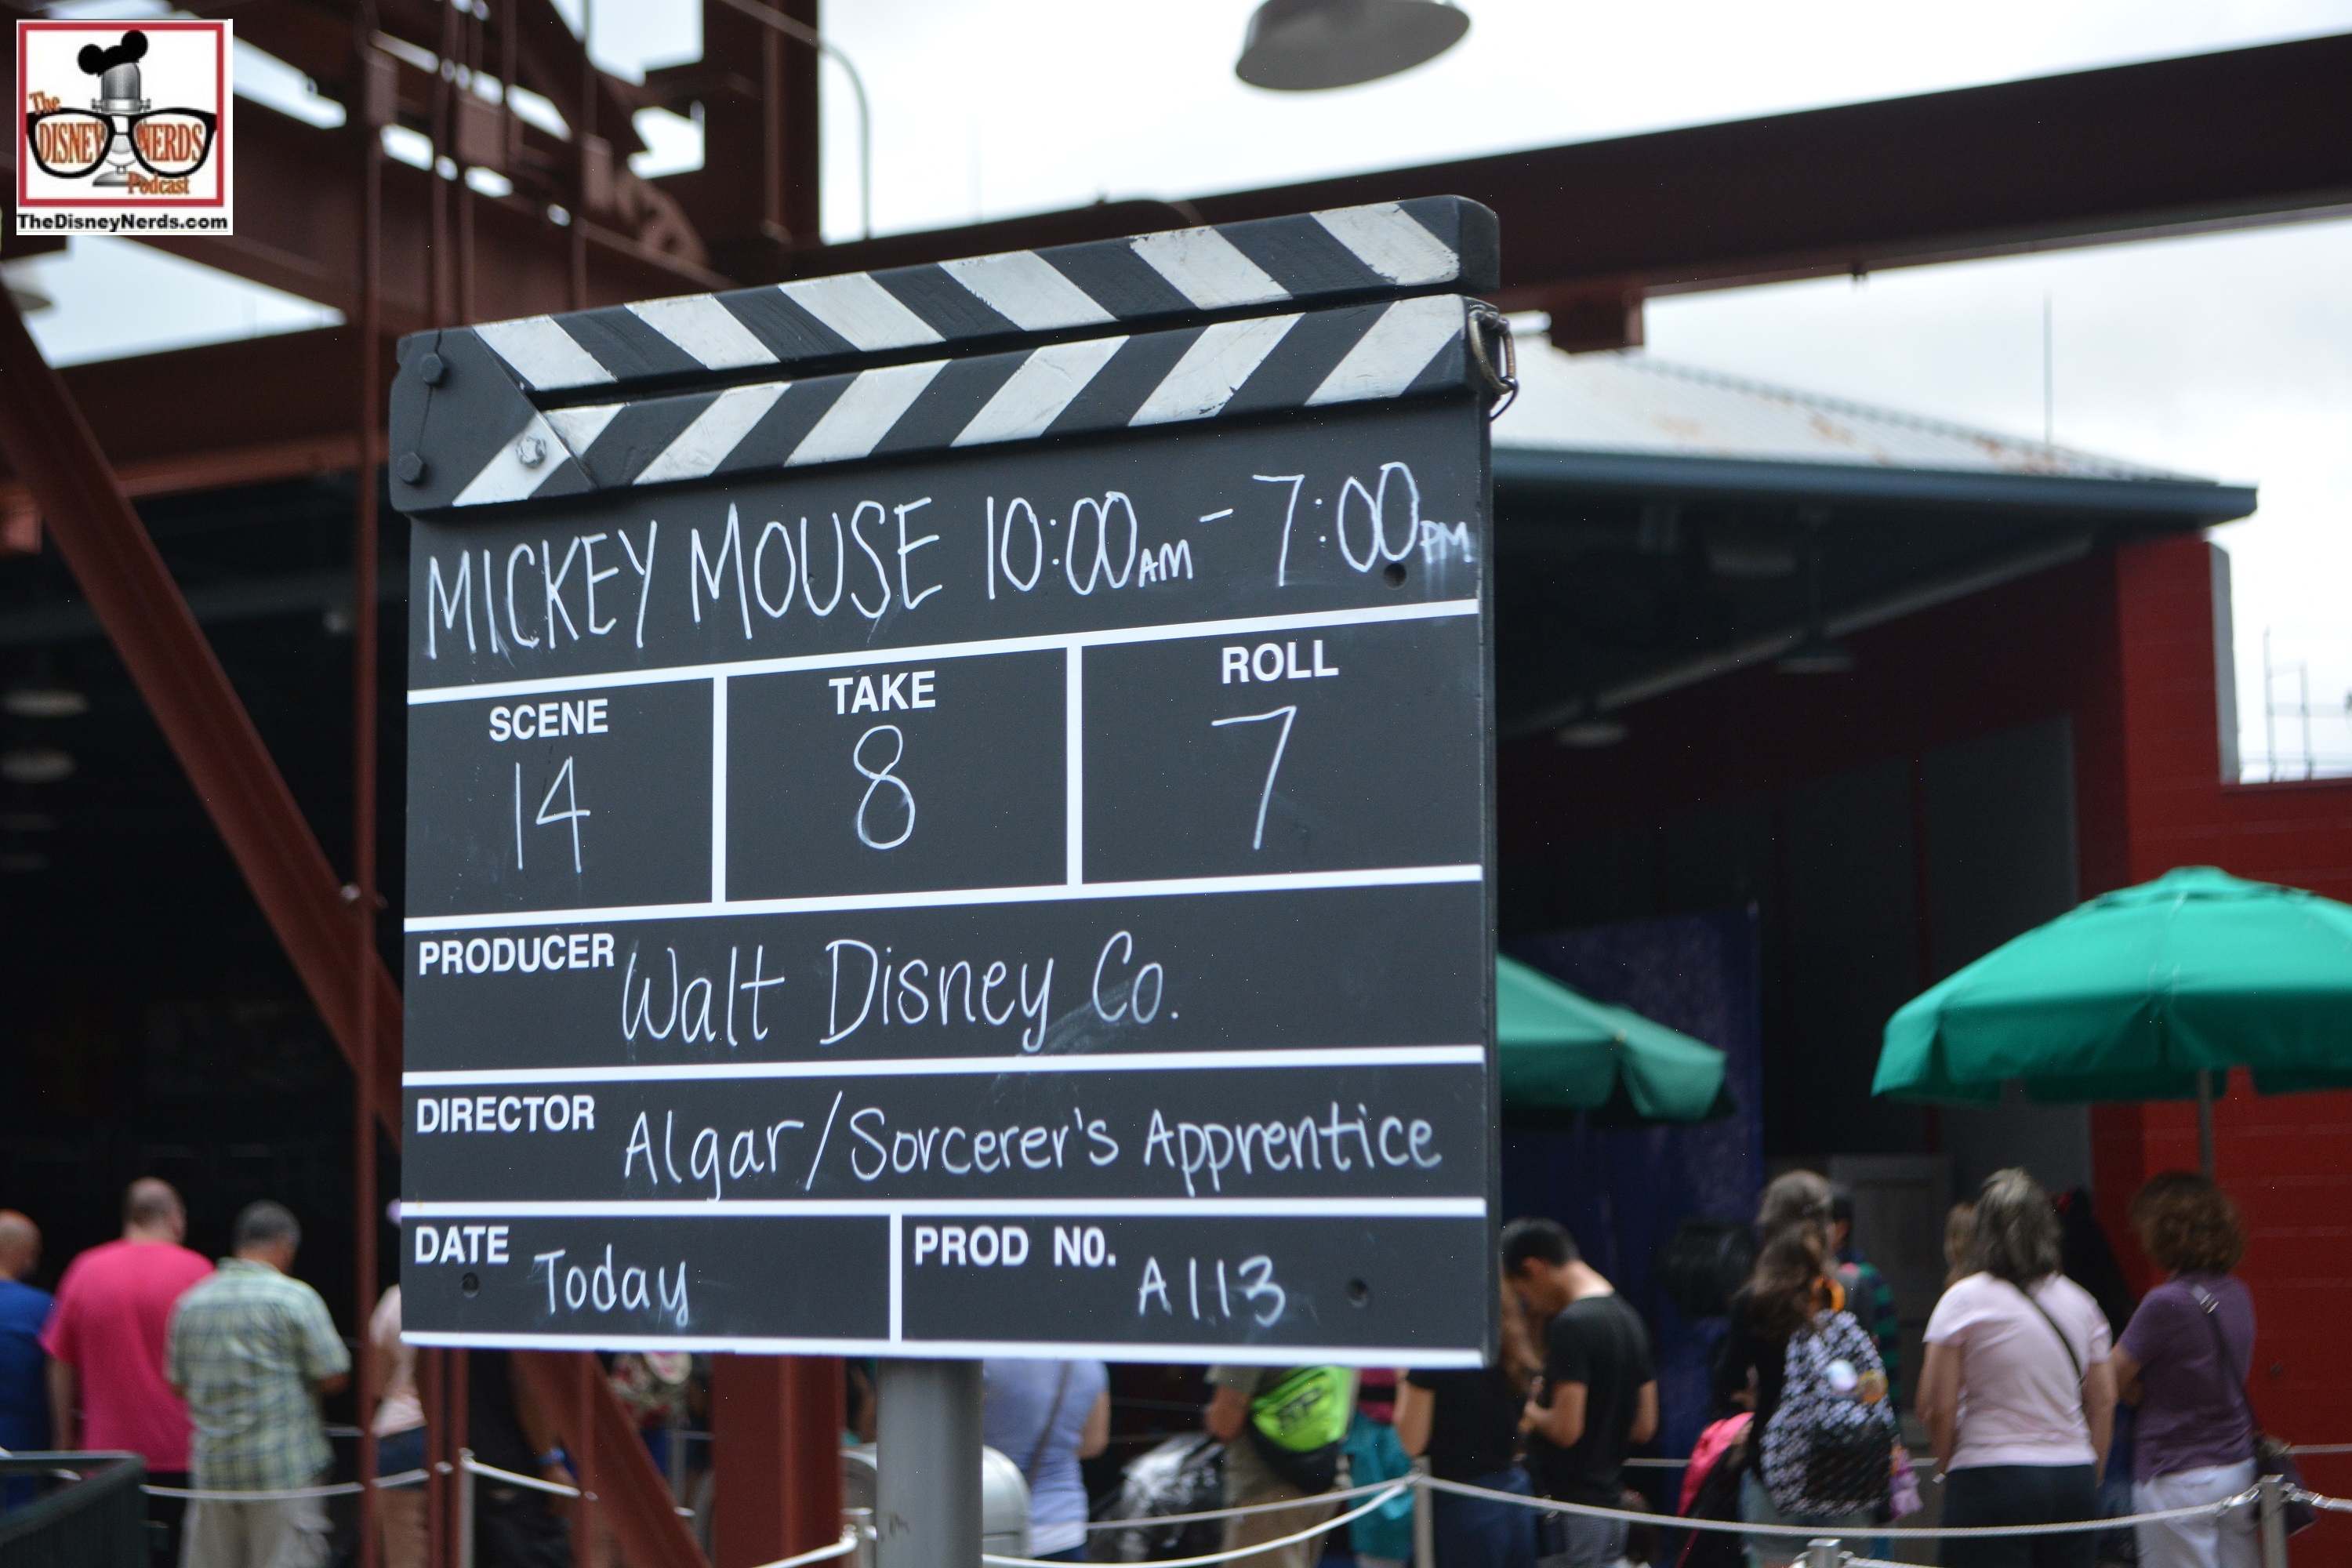 Sorcerer Mickey can be found in the former queue for Backlot Tour...